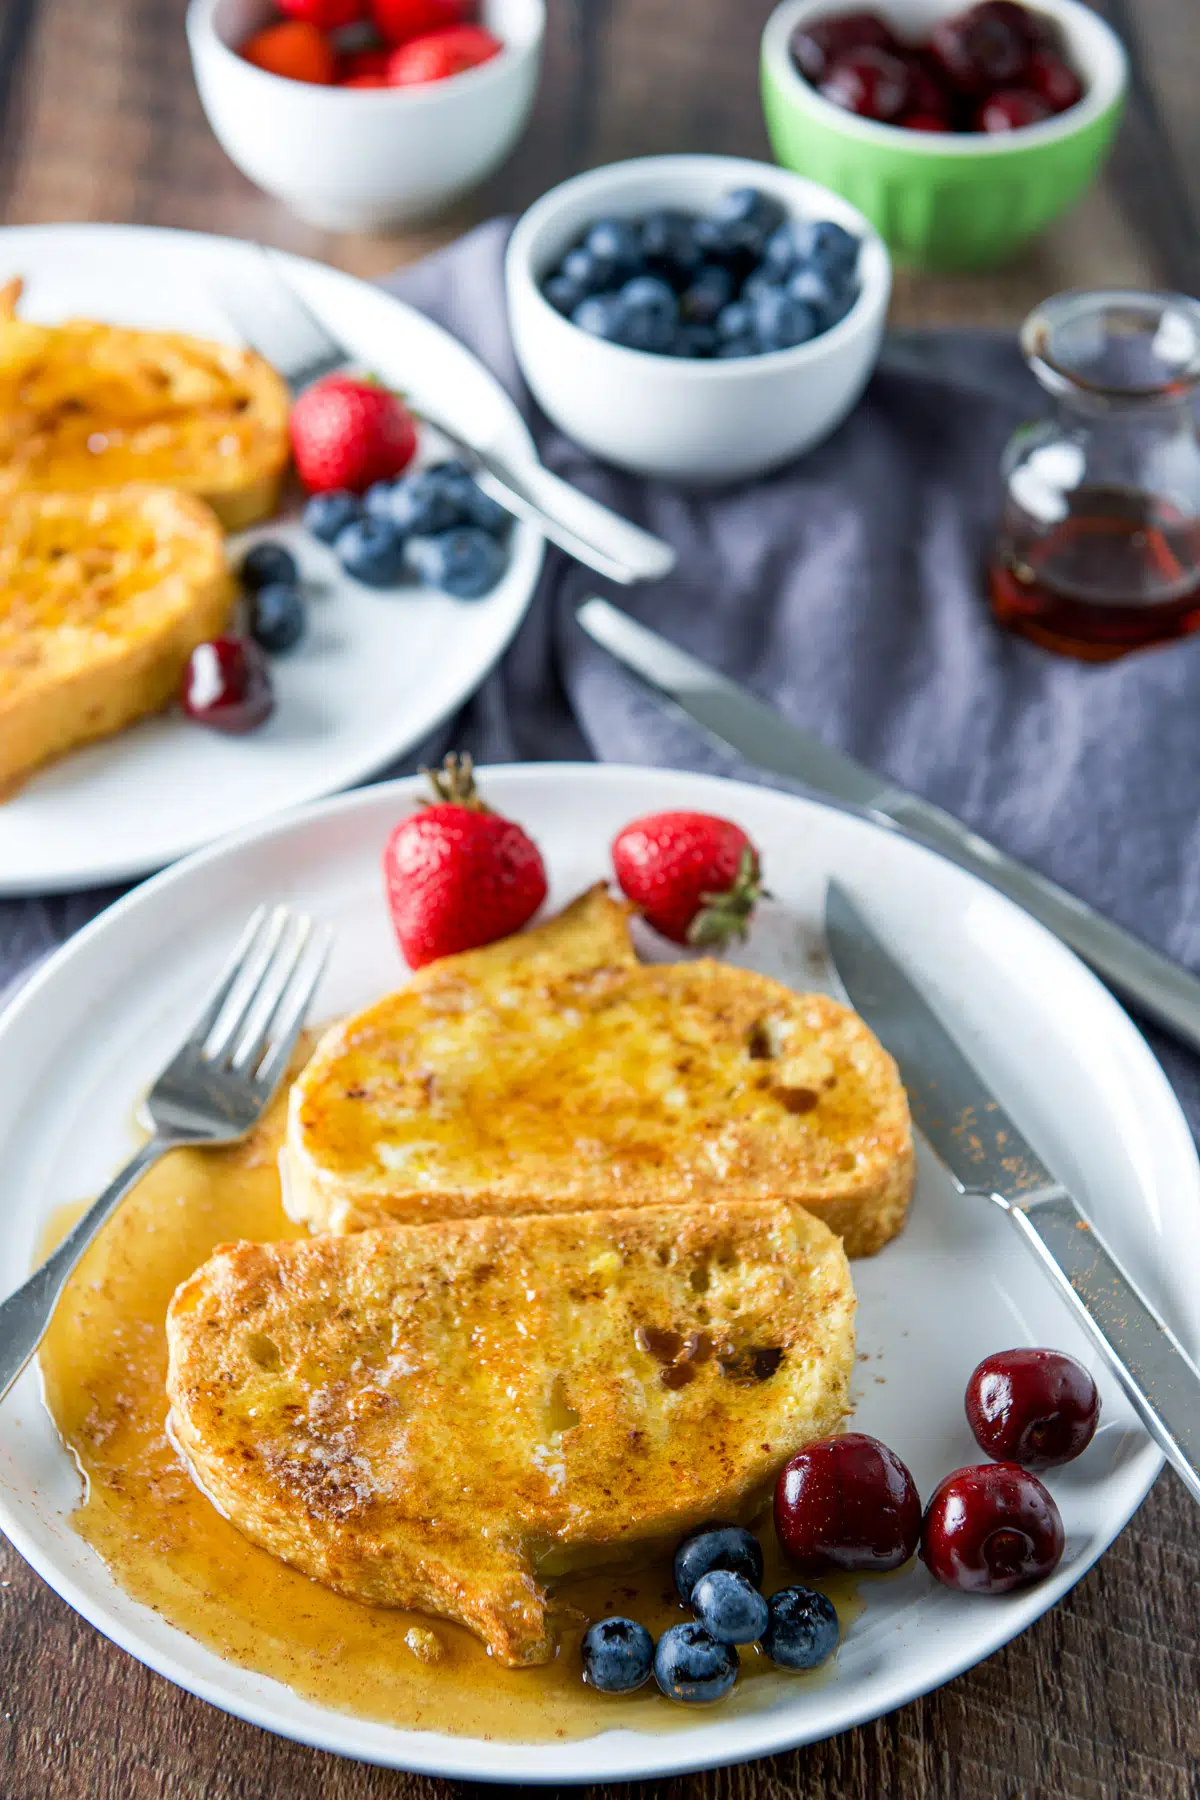 A high view of fruit on plates with French toast that has maple syrup on it